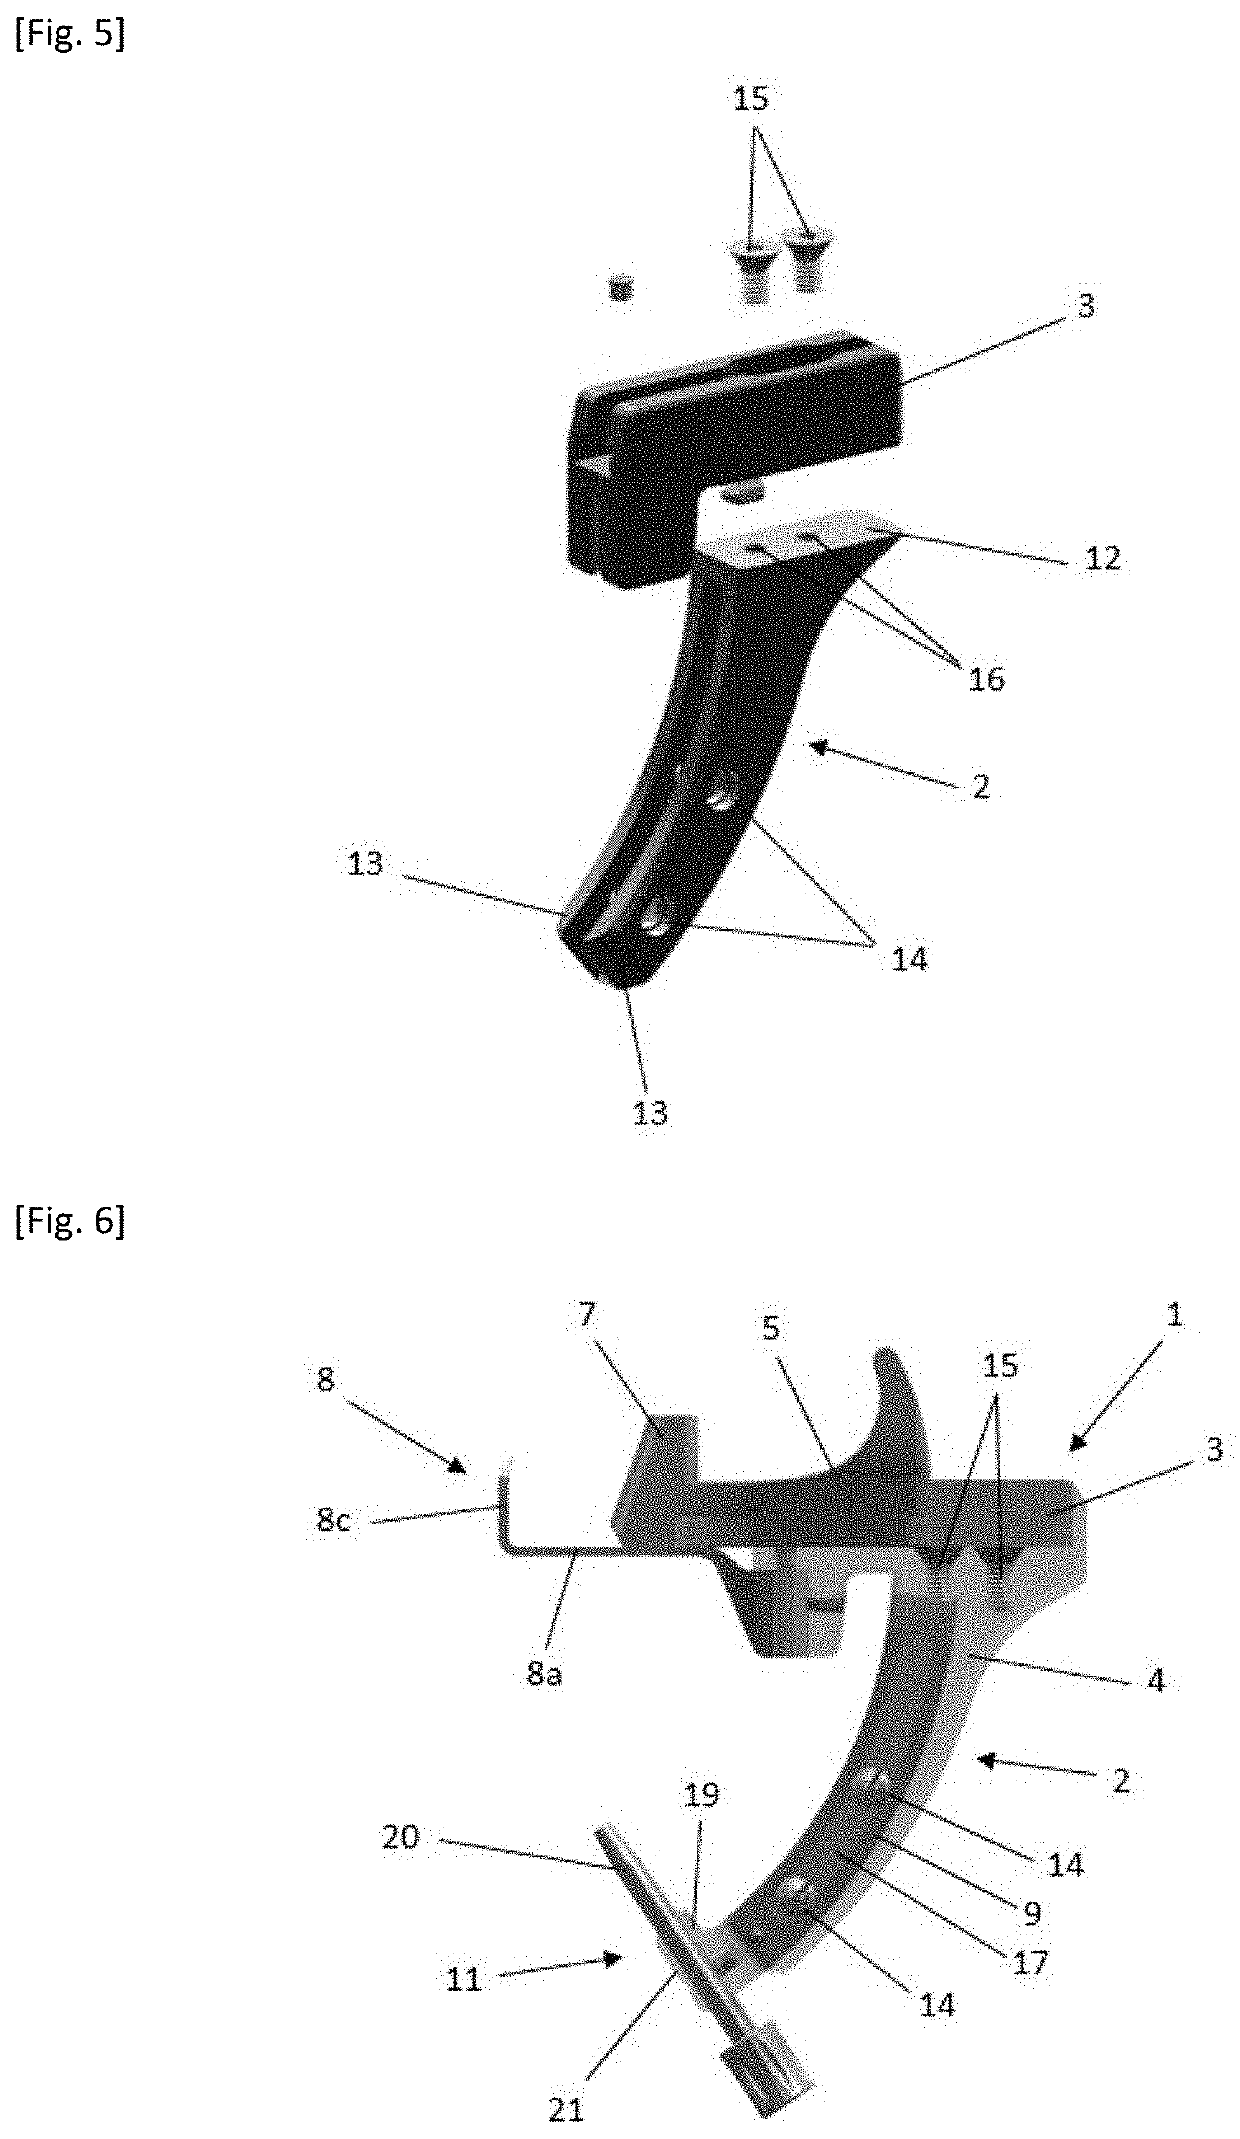 Reusable surgical guide for osteosynthesis surgery in particular of the hallux valgus